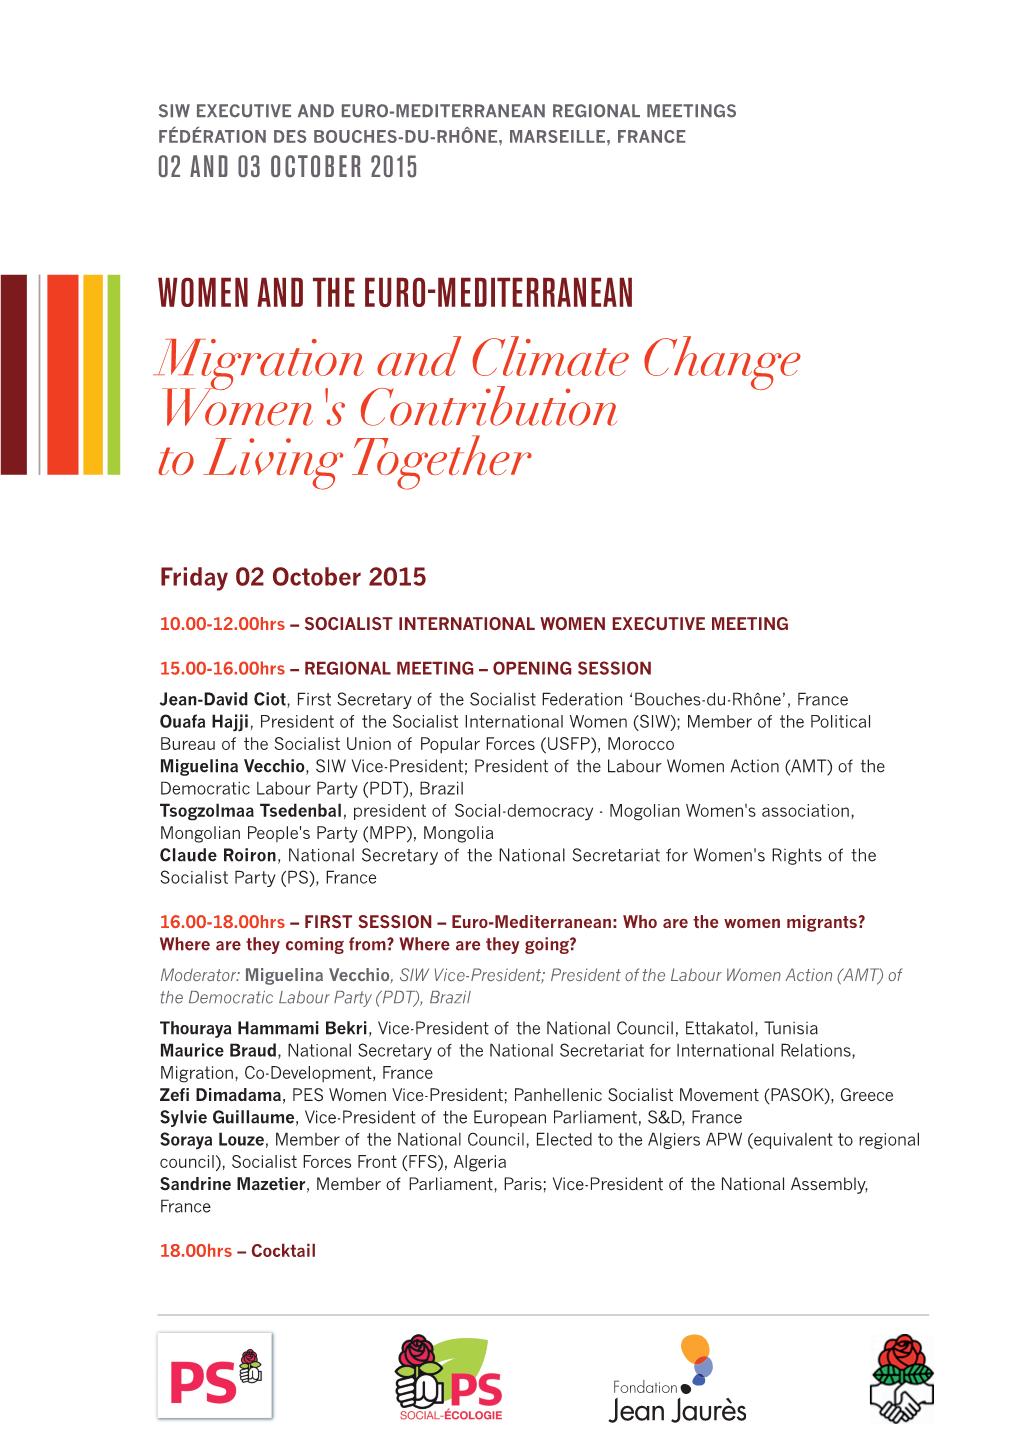 Migration and Climate Change Women's Contribution to Living Together